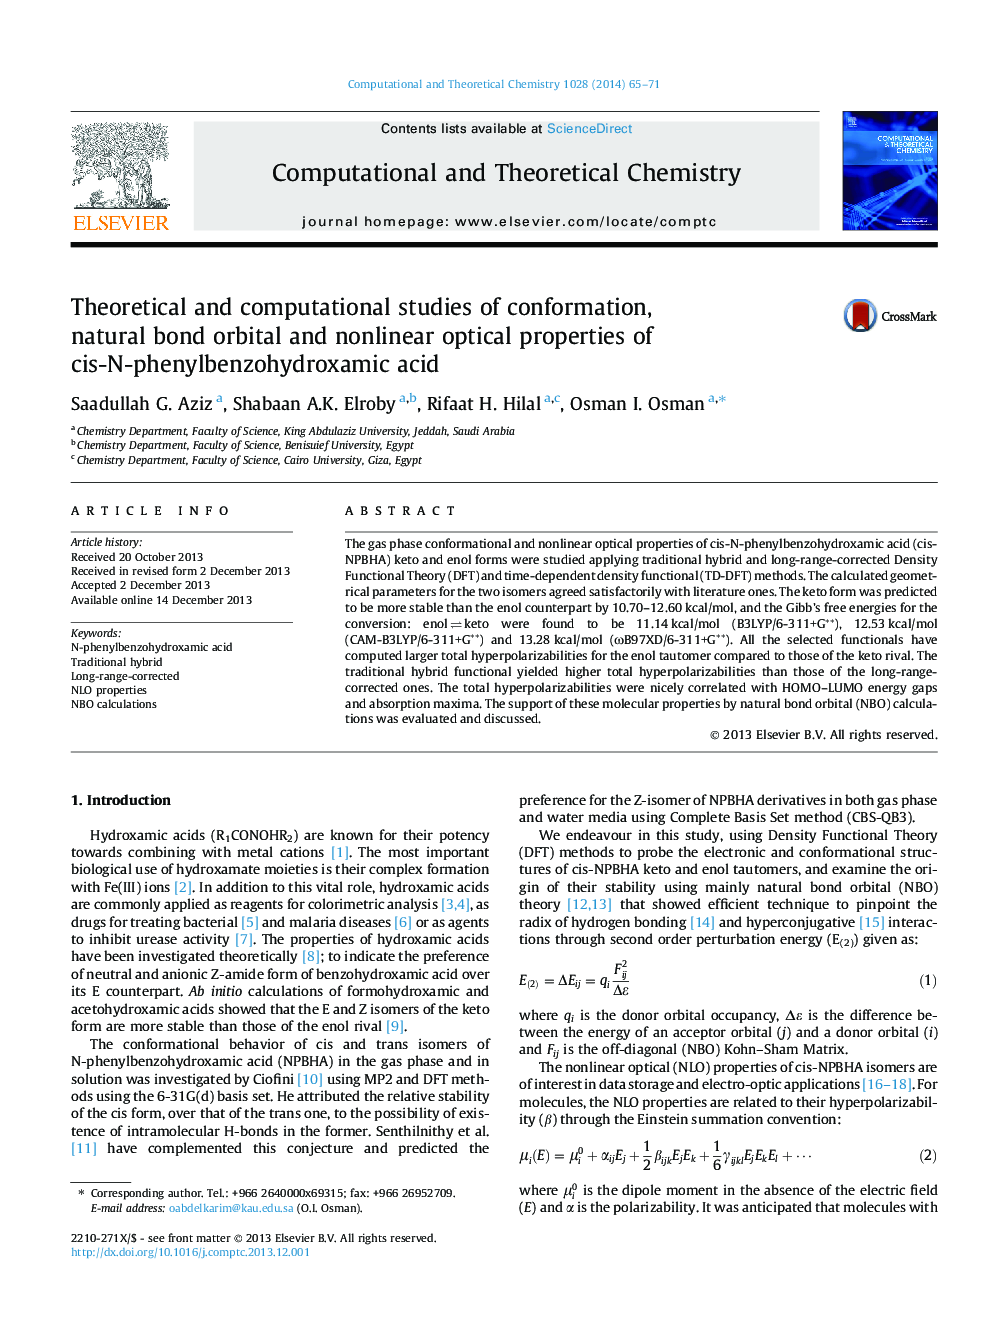 Theoretical and computational studies of conformation, natural bond orbital and nonlinear optical properties of cis-N-phenylbenzohydroxamic acid